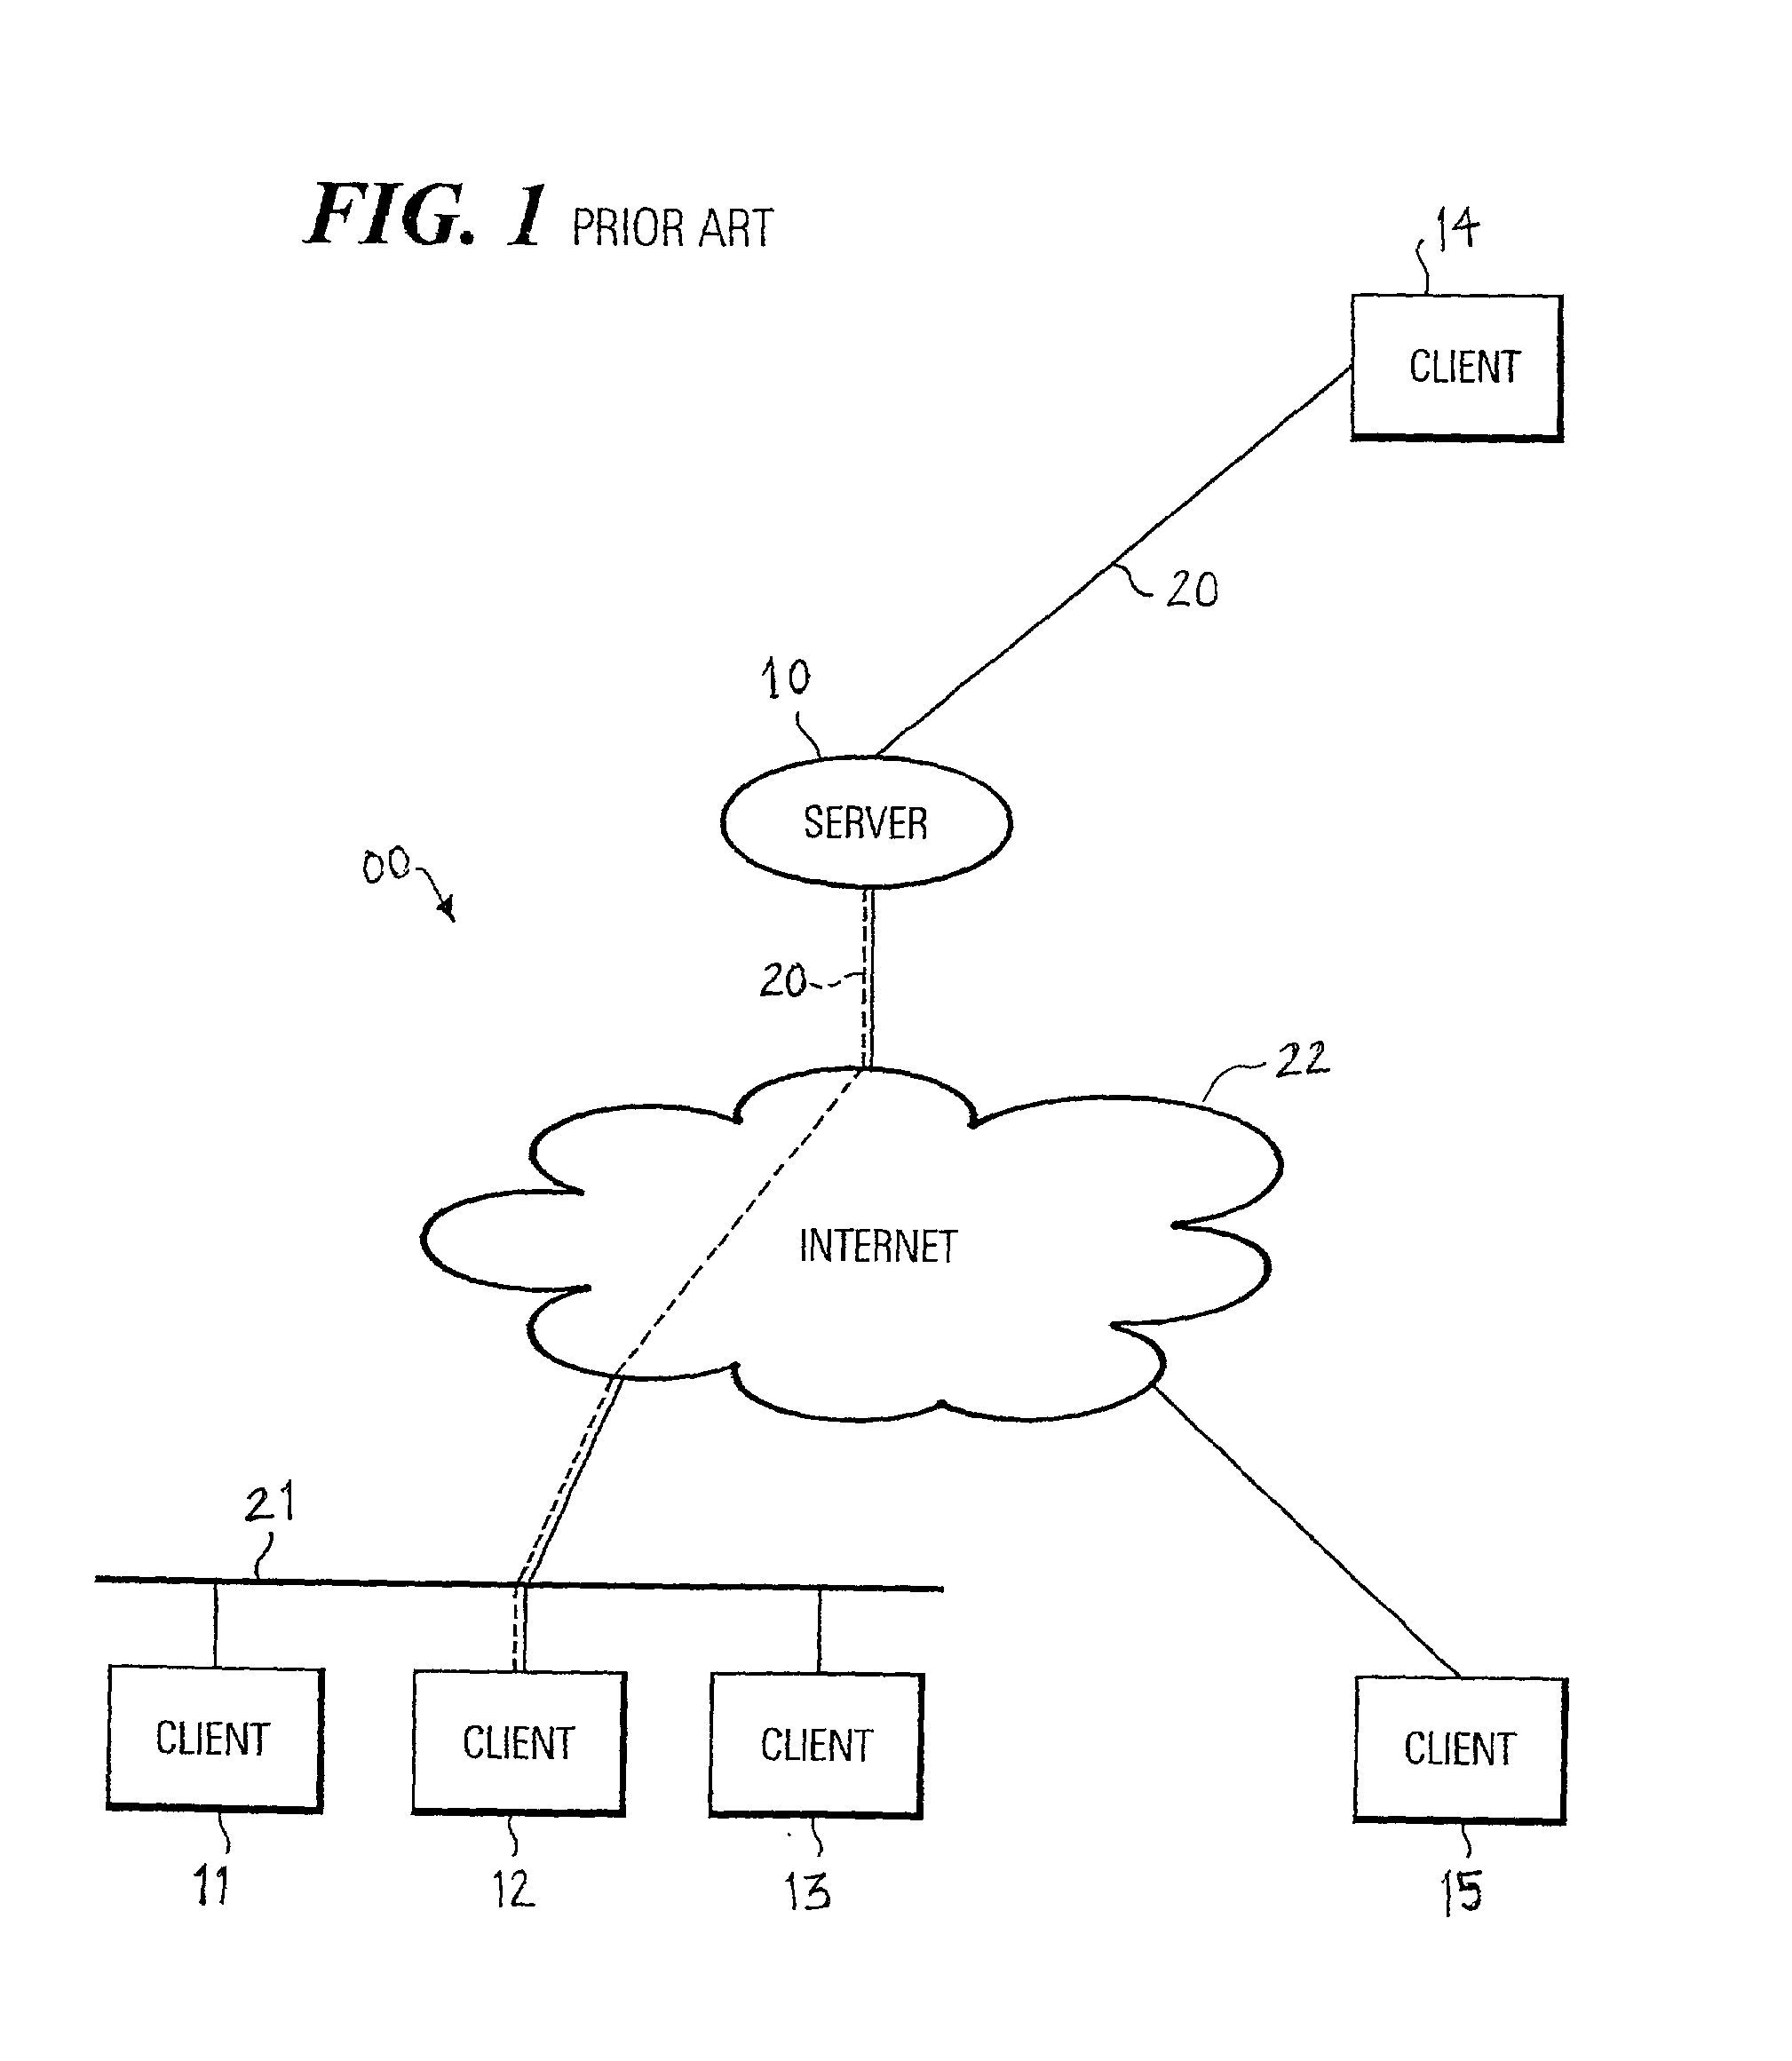 Method and apparatus for providing a client by a server with an instruction data set in a predetermined format in response to a content data request message by a client